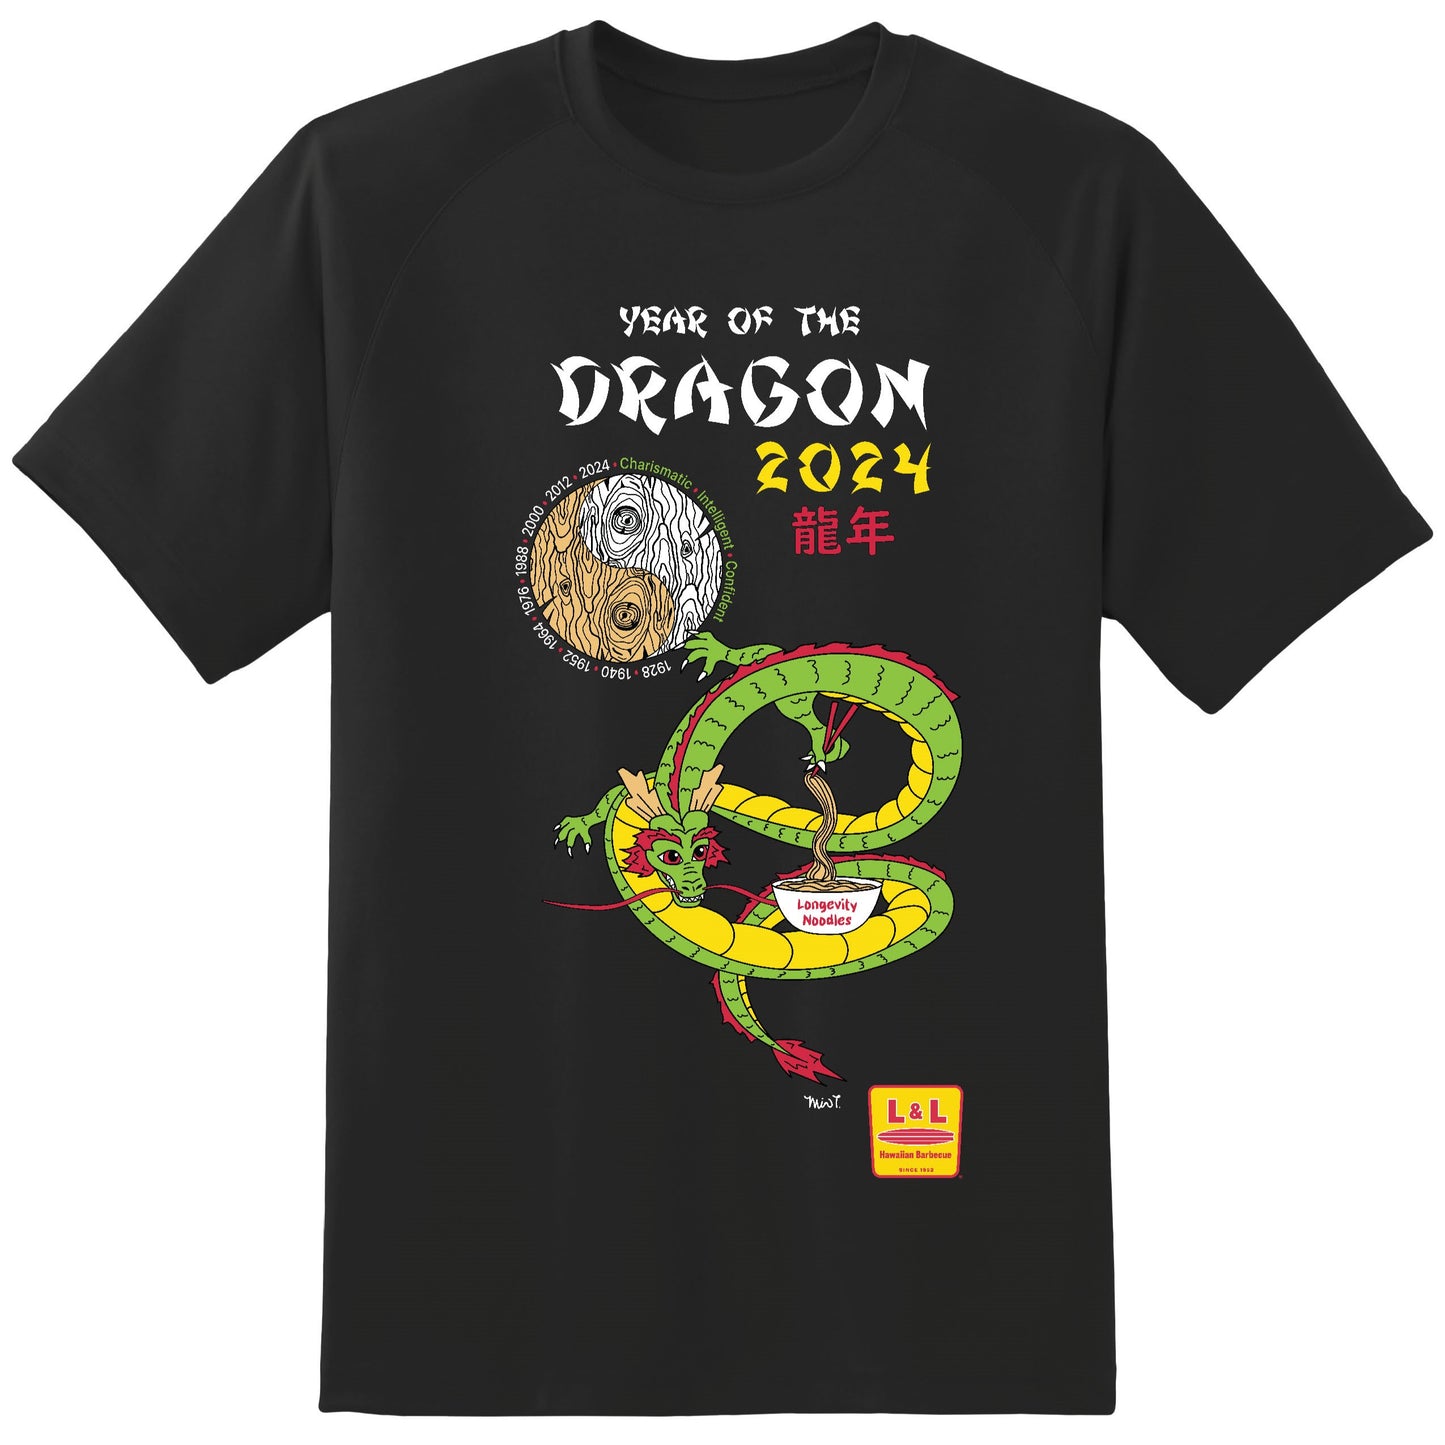 Year of the Dragon Shirt